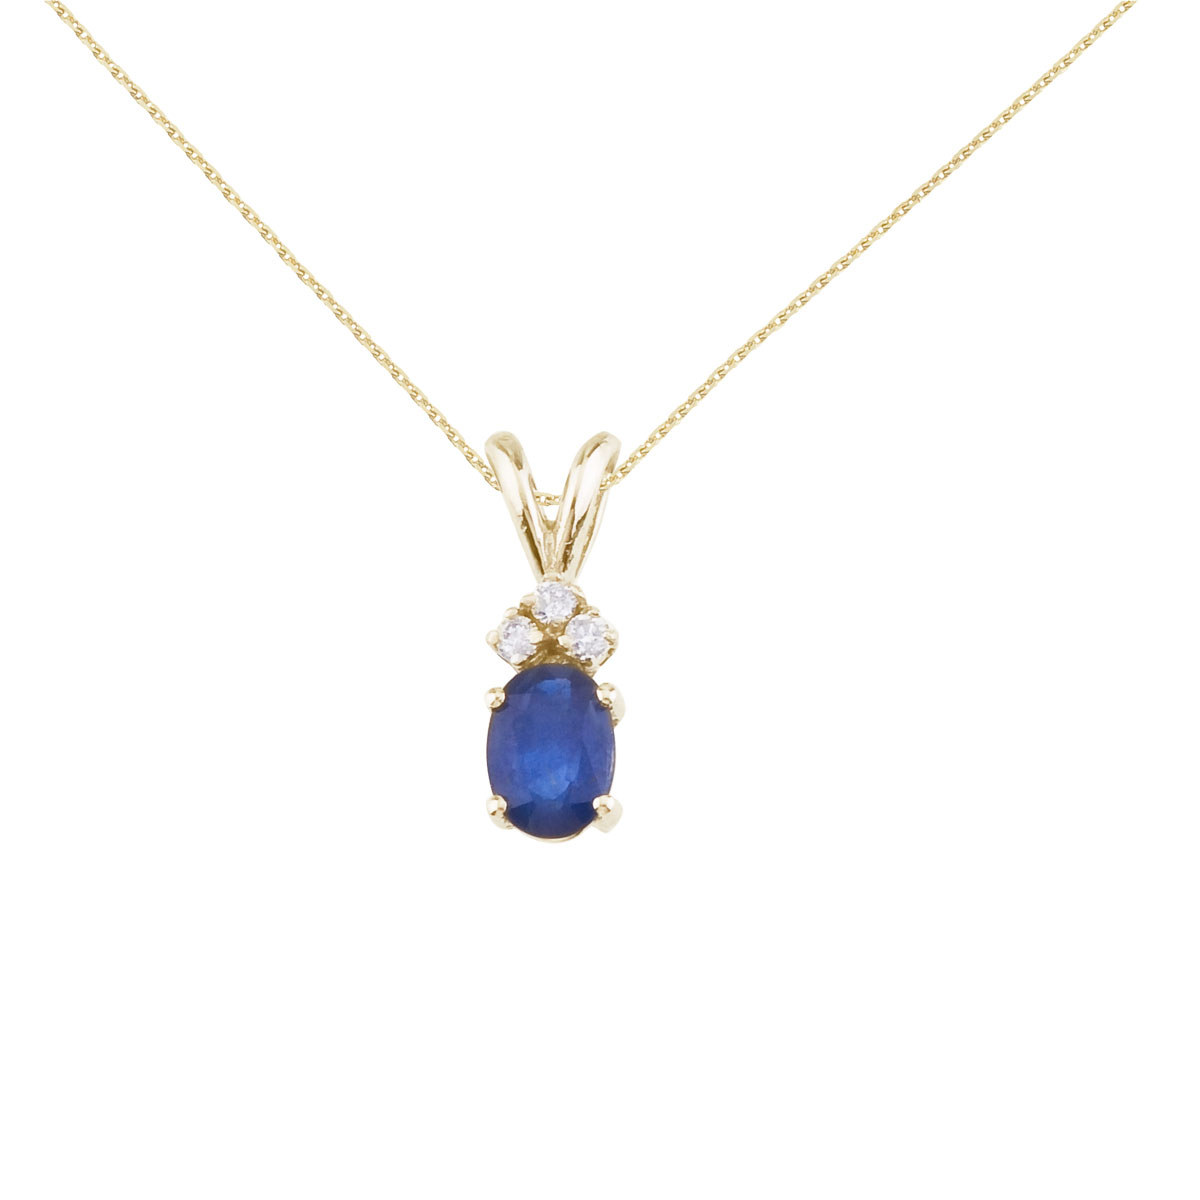 7x5 mm oval natural sapphire pendant topped with 3 bright diamonds set in 14k yellow gold.